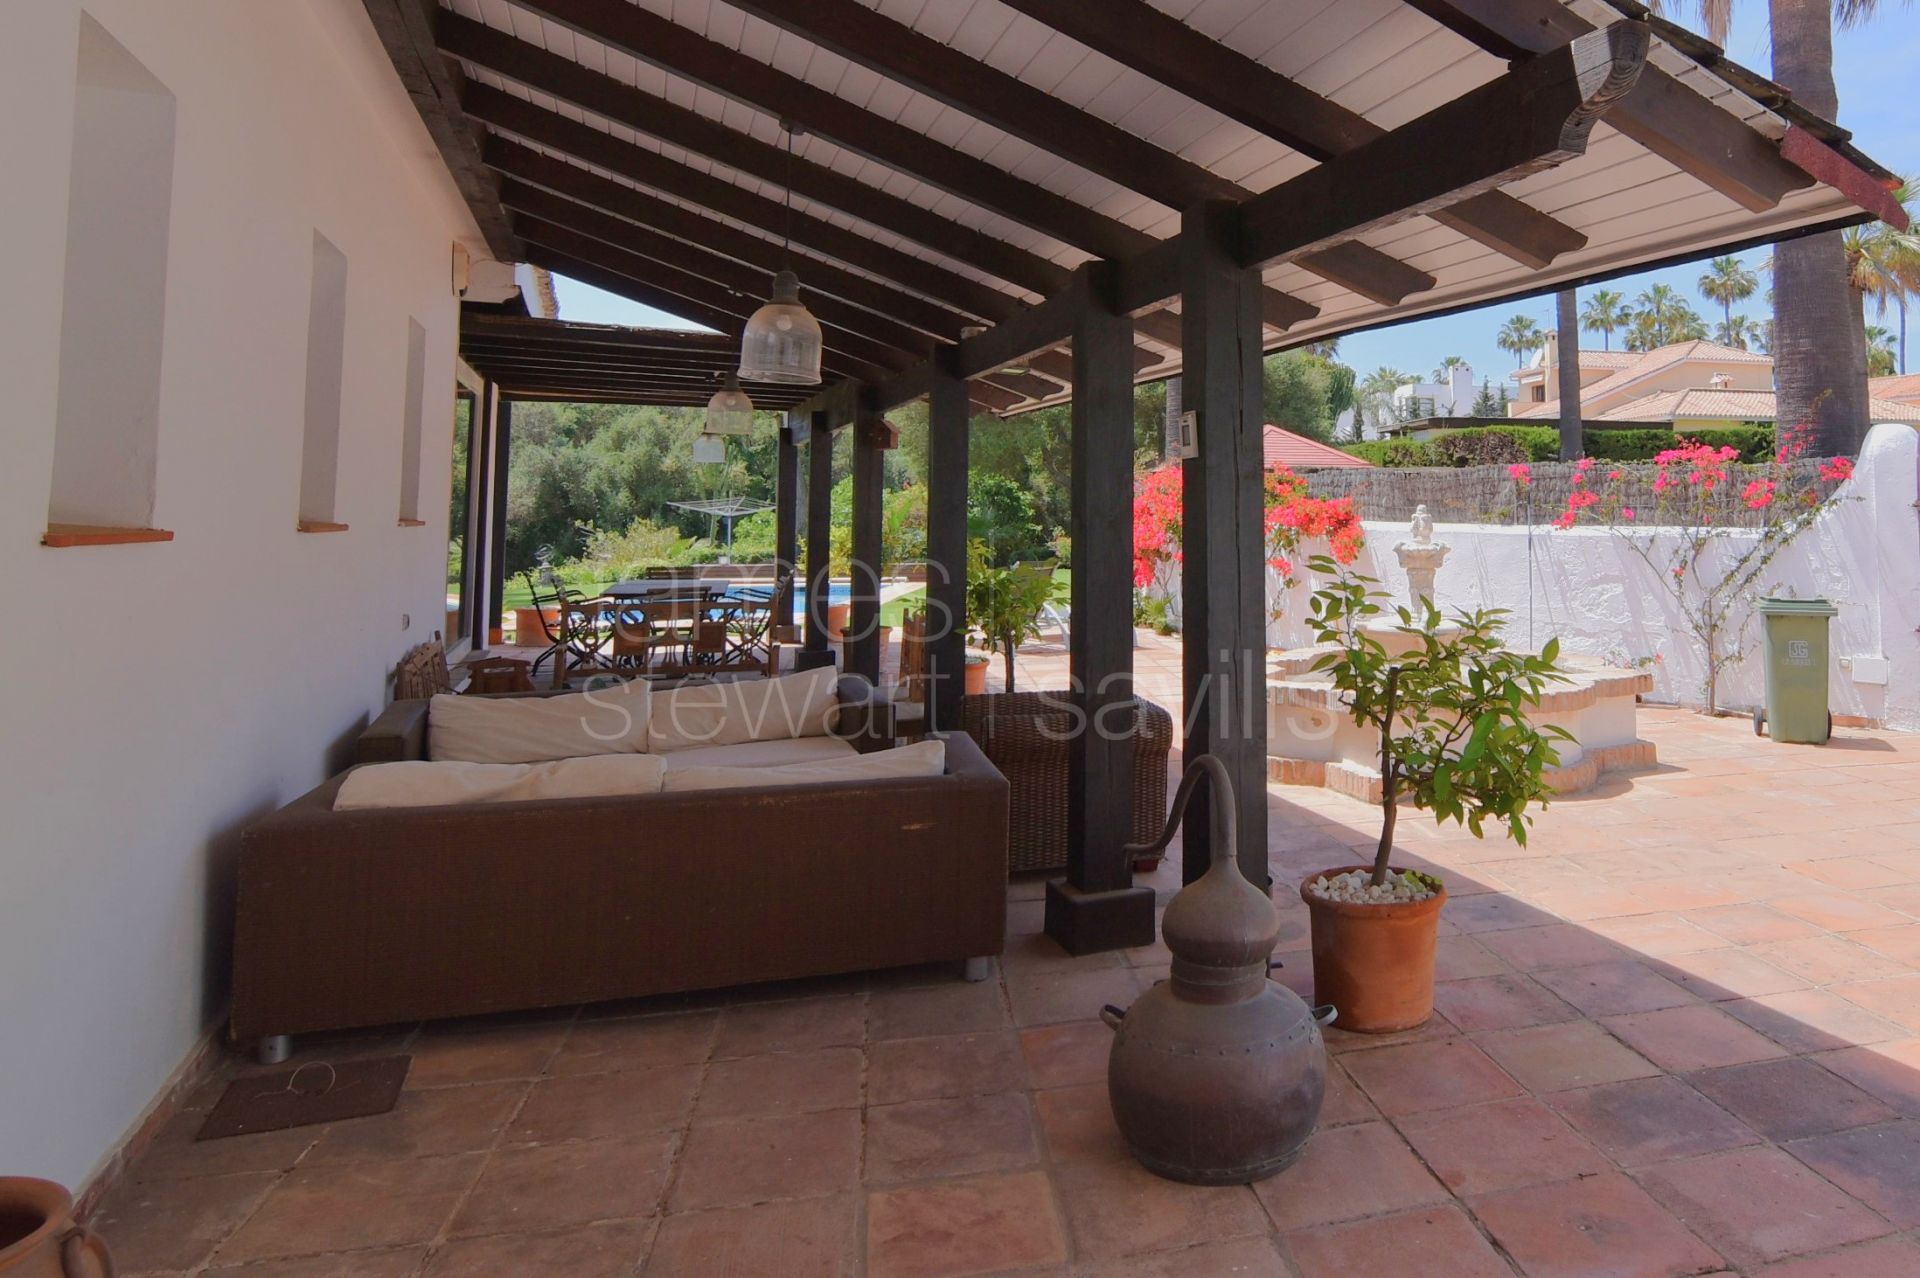 Characterful villa on 4 plots with lovely country views and guest house